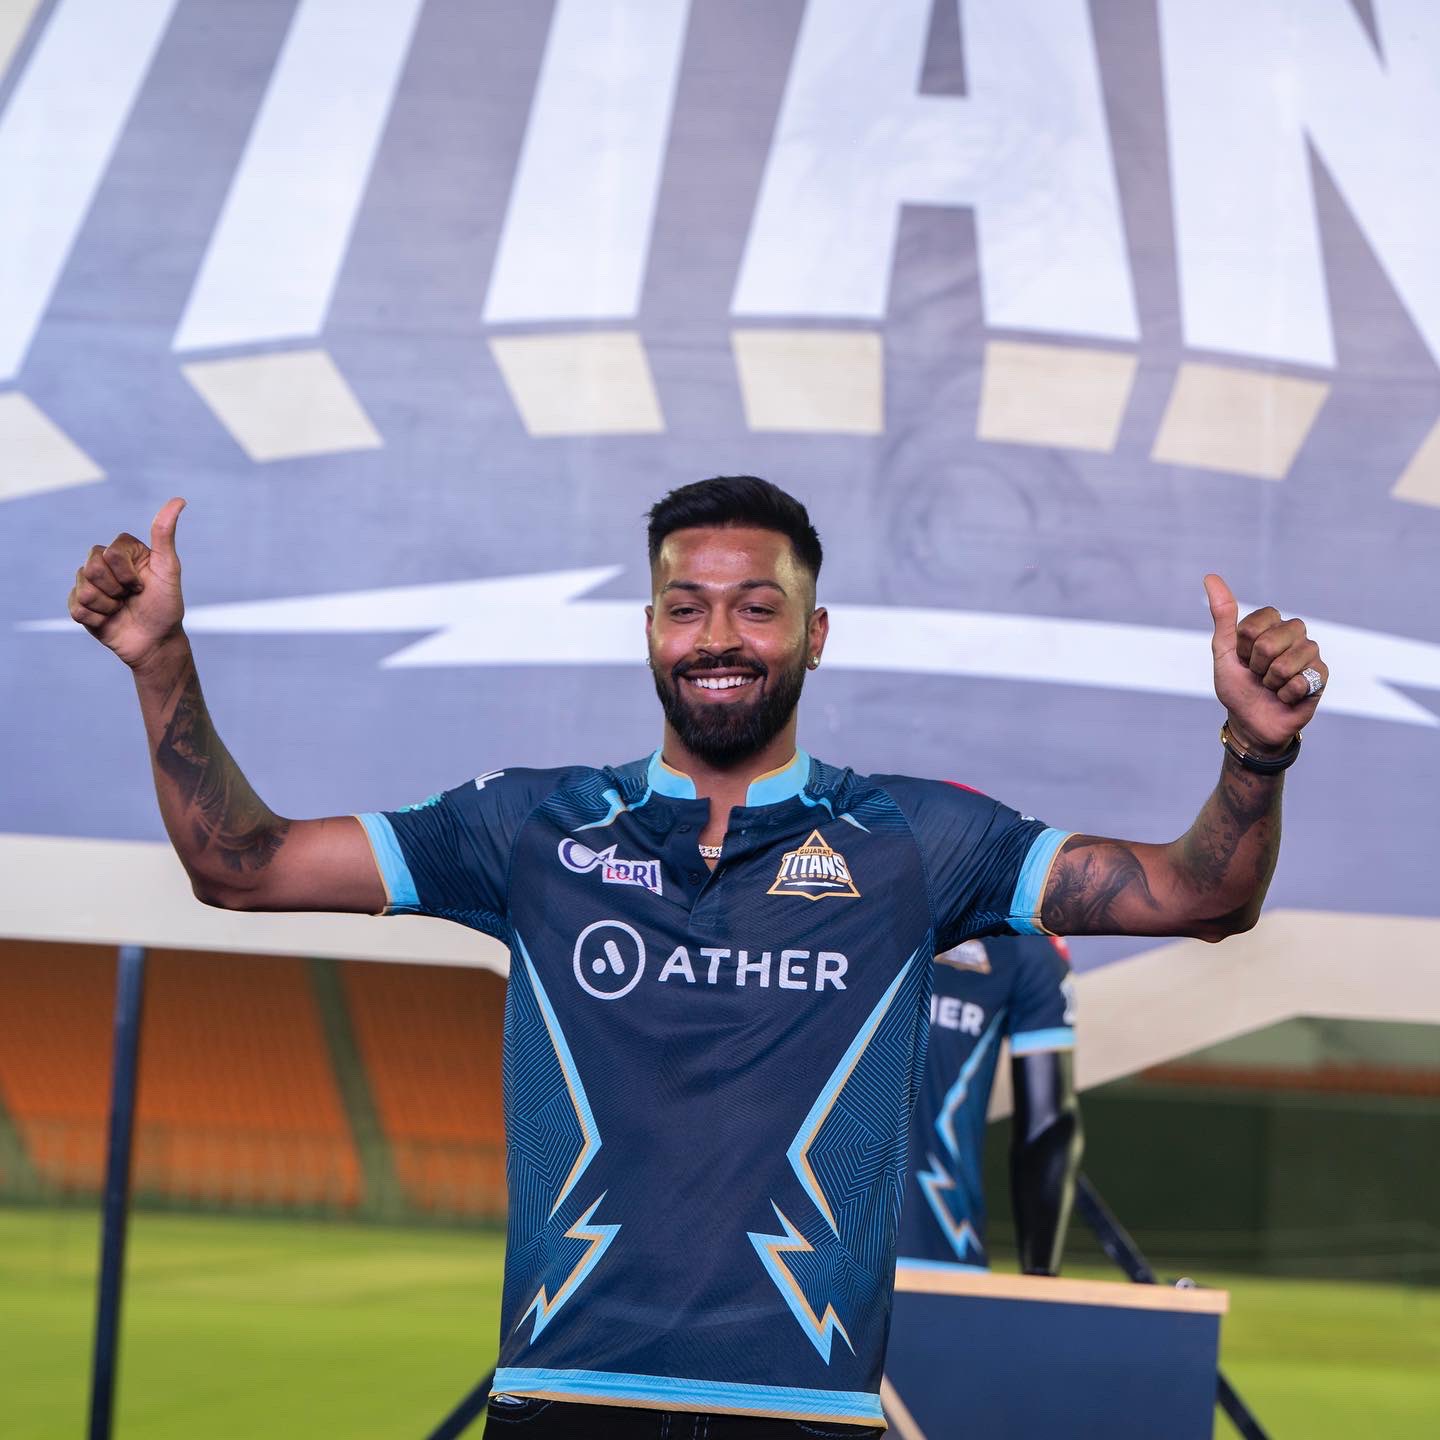 “We Are Not Here To Prove Anything” – Gujarat Titans Captain Hardik Pandya Ahead Of IPL 2022